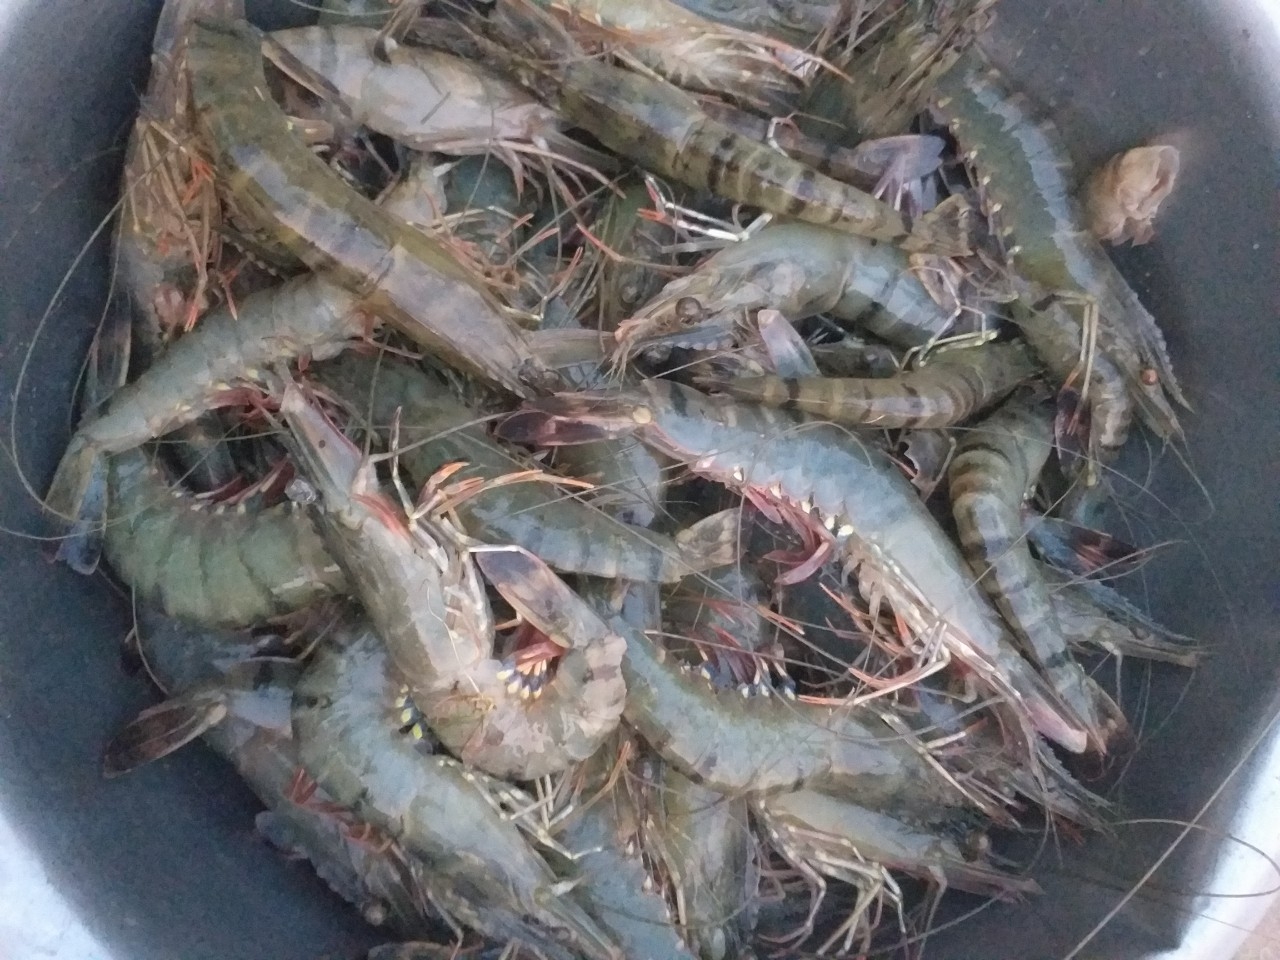 SHRIMP RAW MATERIAL PRICES ON APR 11, 2020 IN MEKONG DELTA